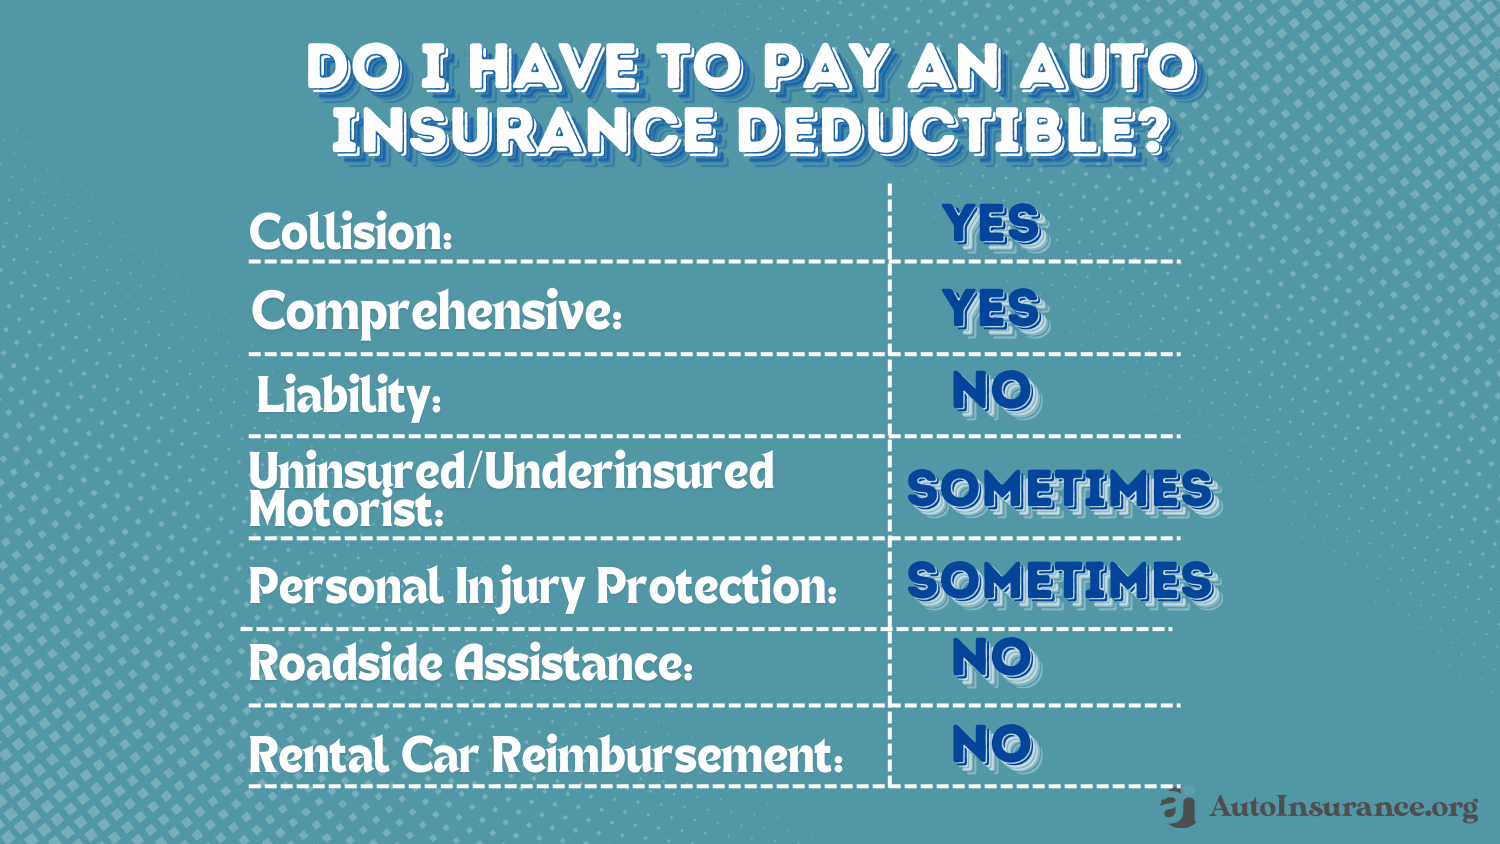 Auto Insurance Deductible: Do I have to pay an auto insurance deductible? Infographic